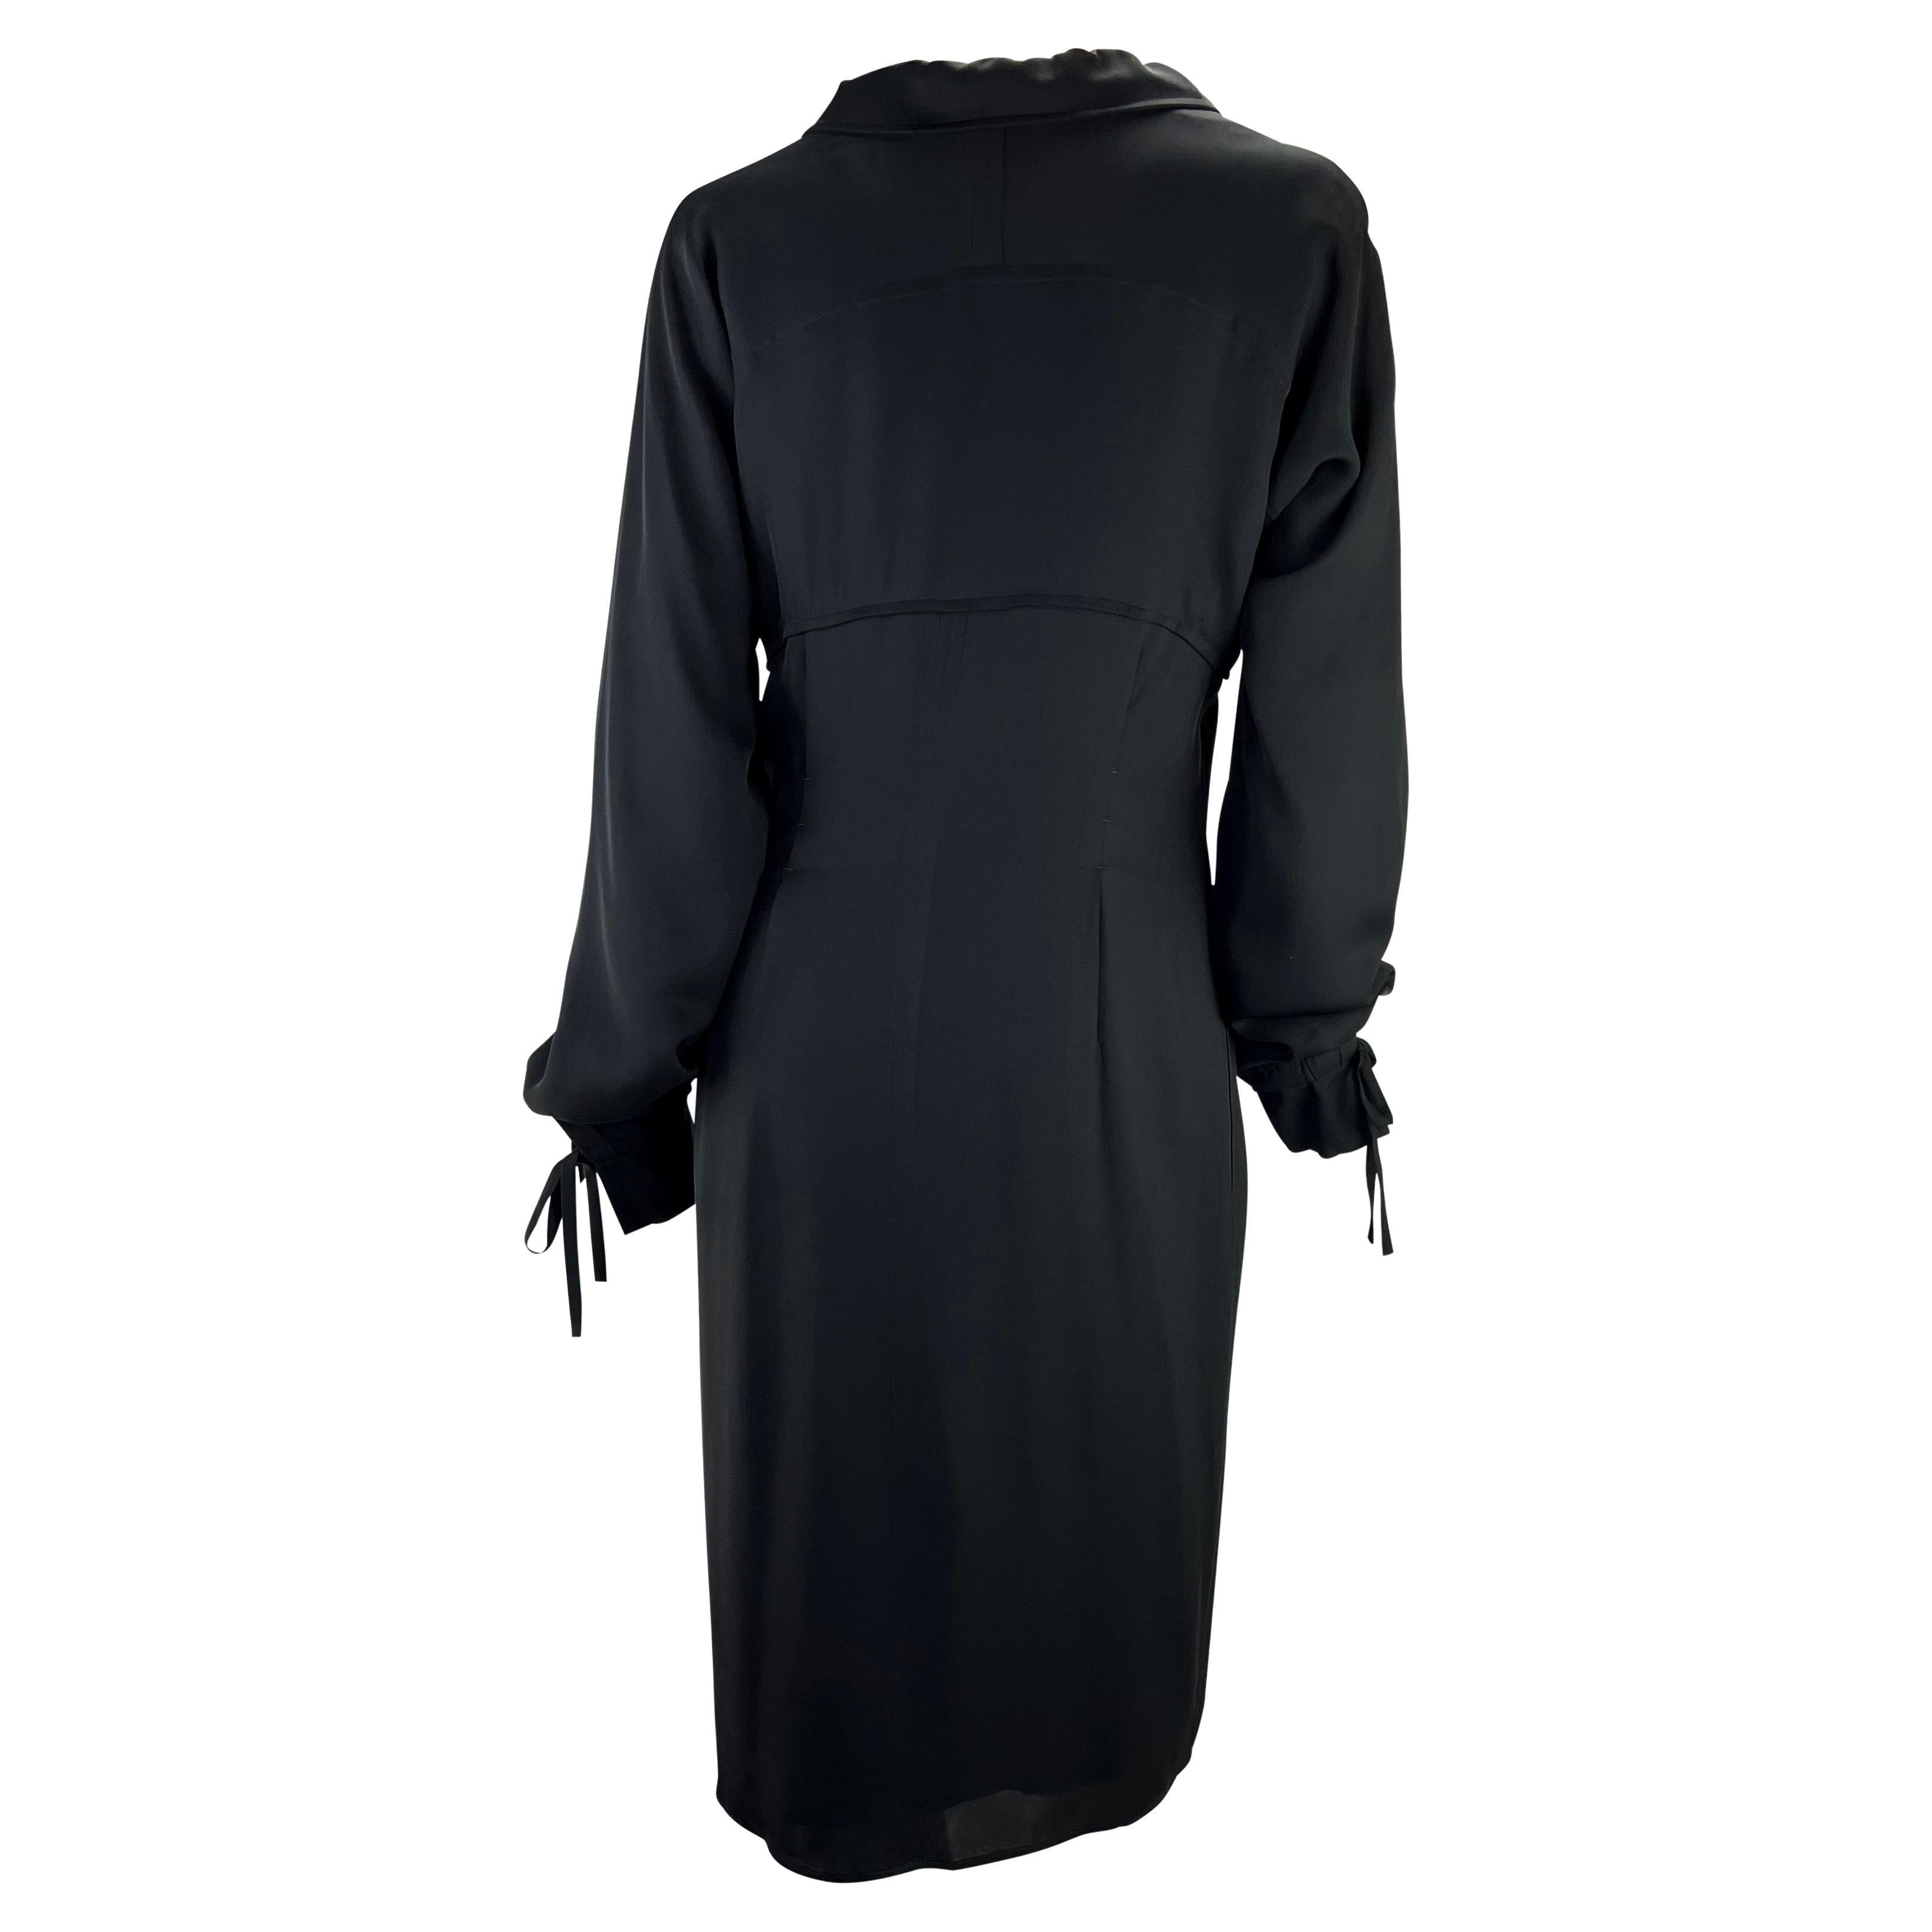 Women's F/W 2001 Yves Saint Laurent by Tom Ford Black Silk Tie Up Shirt Dress For Sale